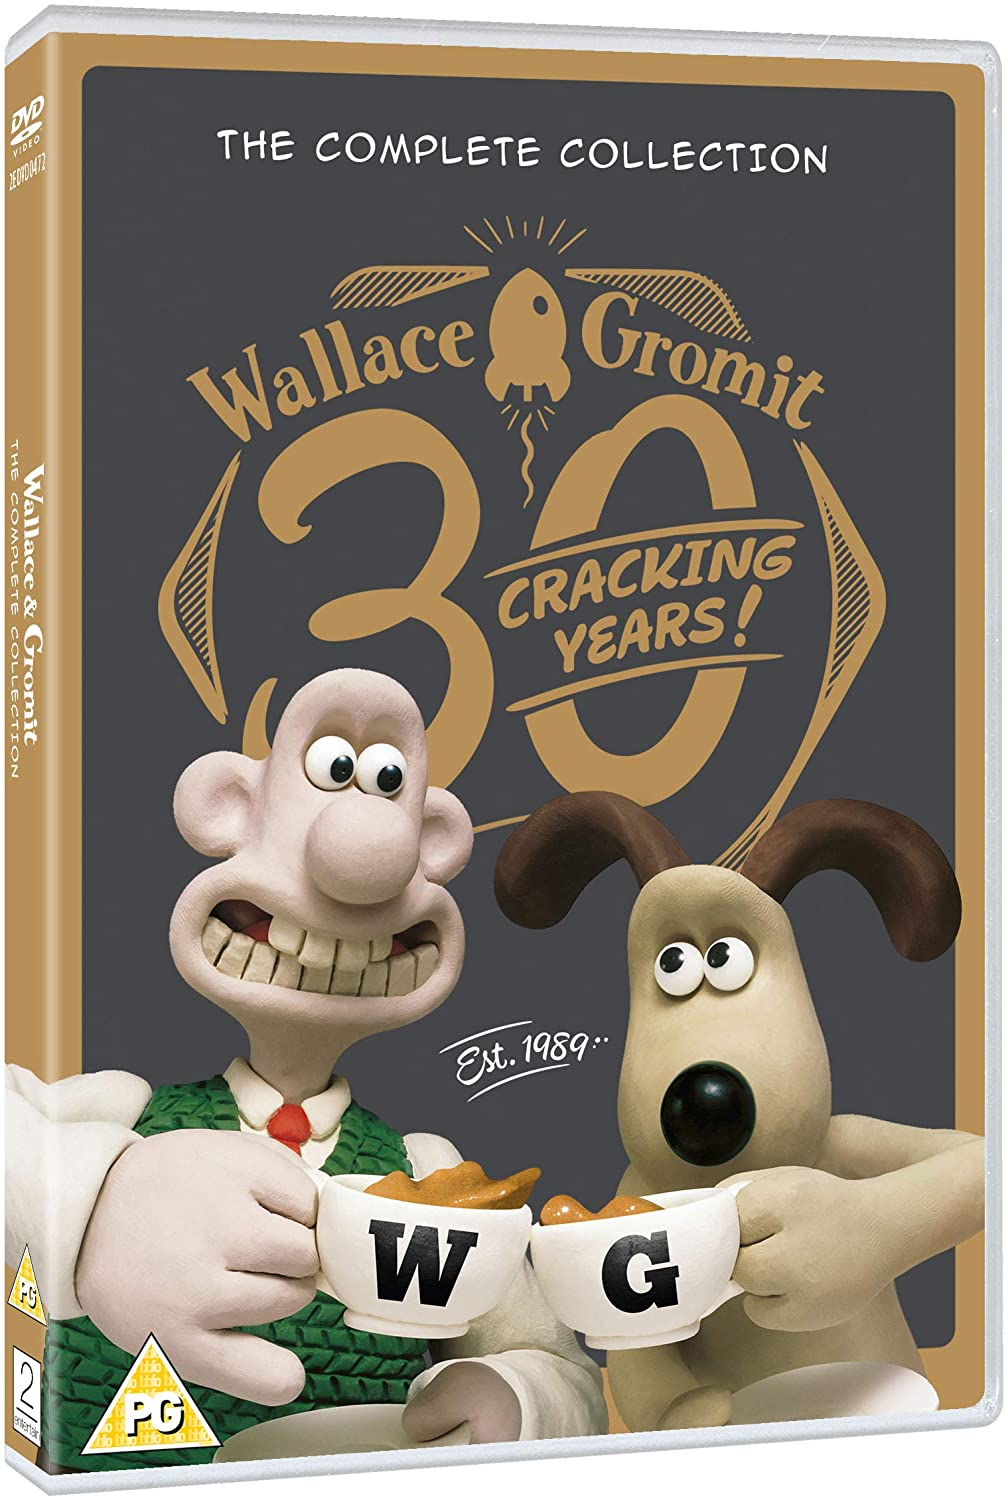 Wallace & Gromit - The Complete Collection [DVD](CD cover the image may vary)